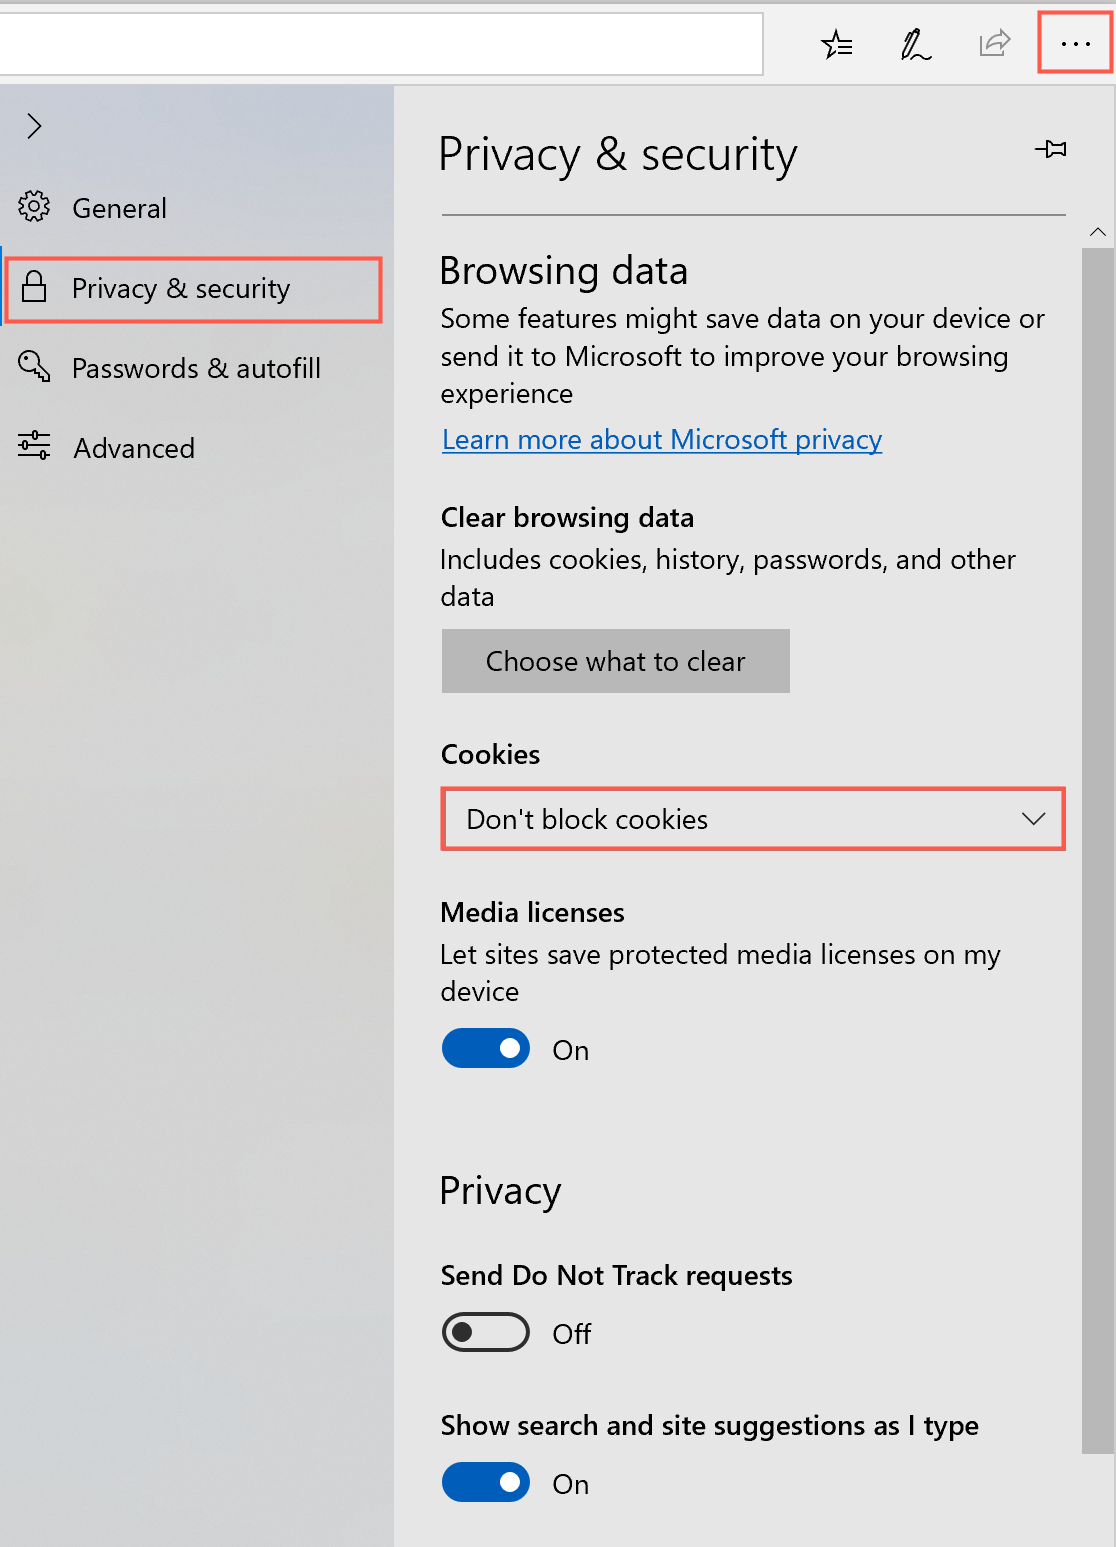 Ensure third party cookies are not blocked in Microsoft Edge